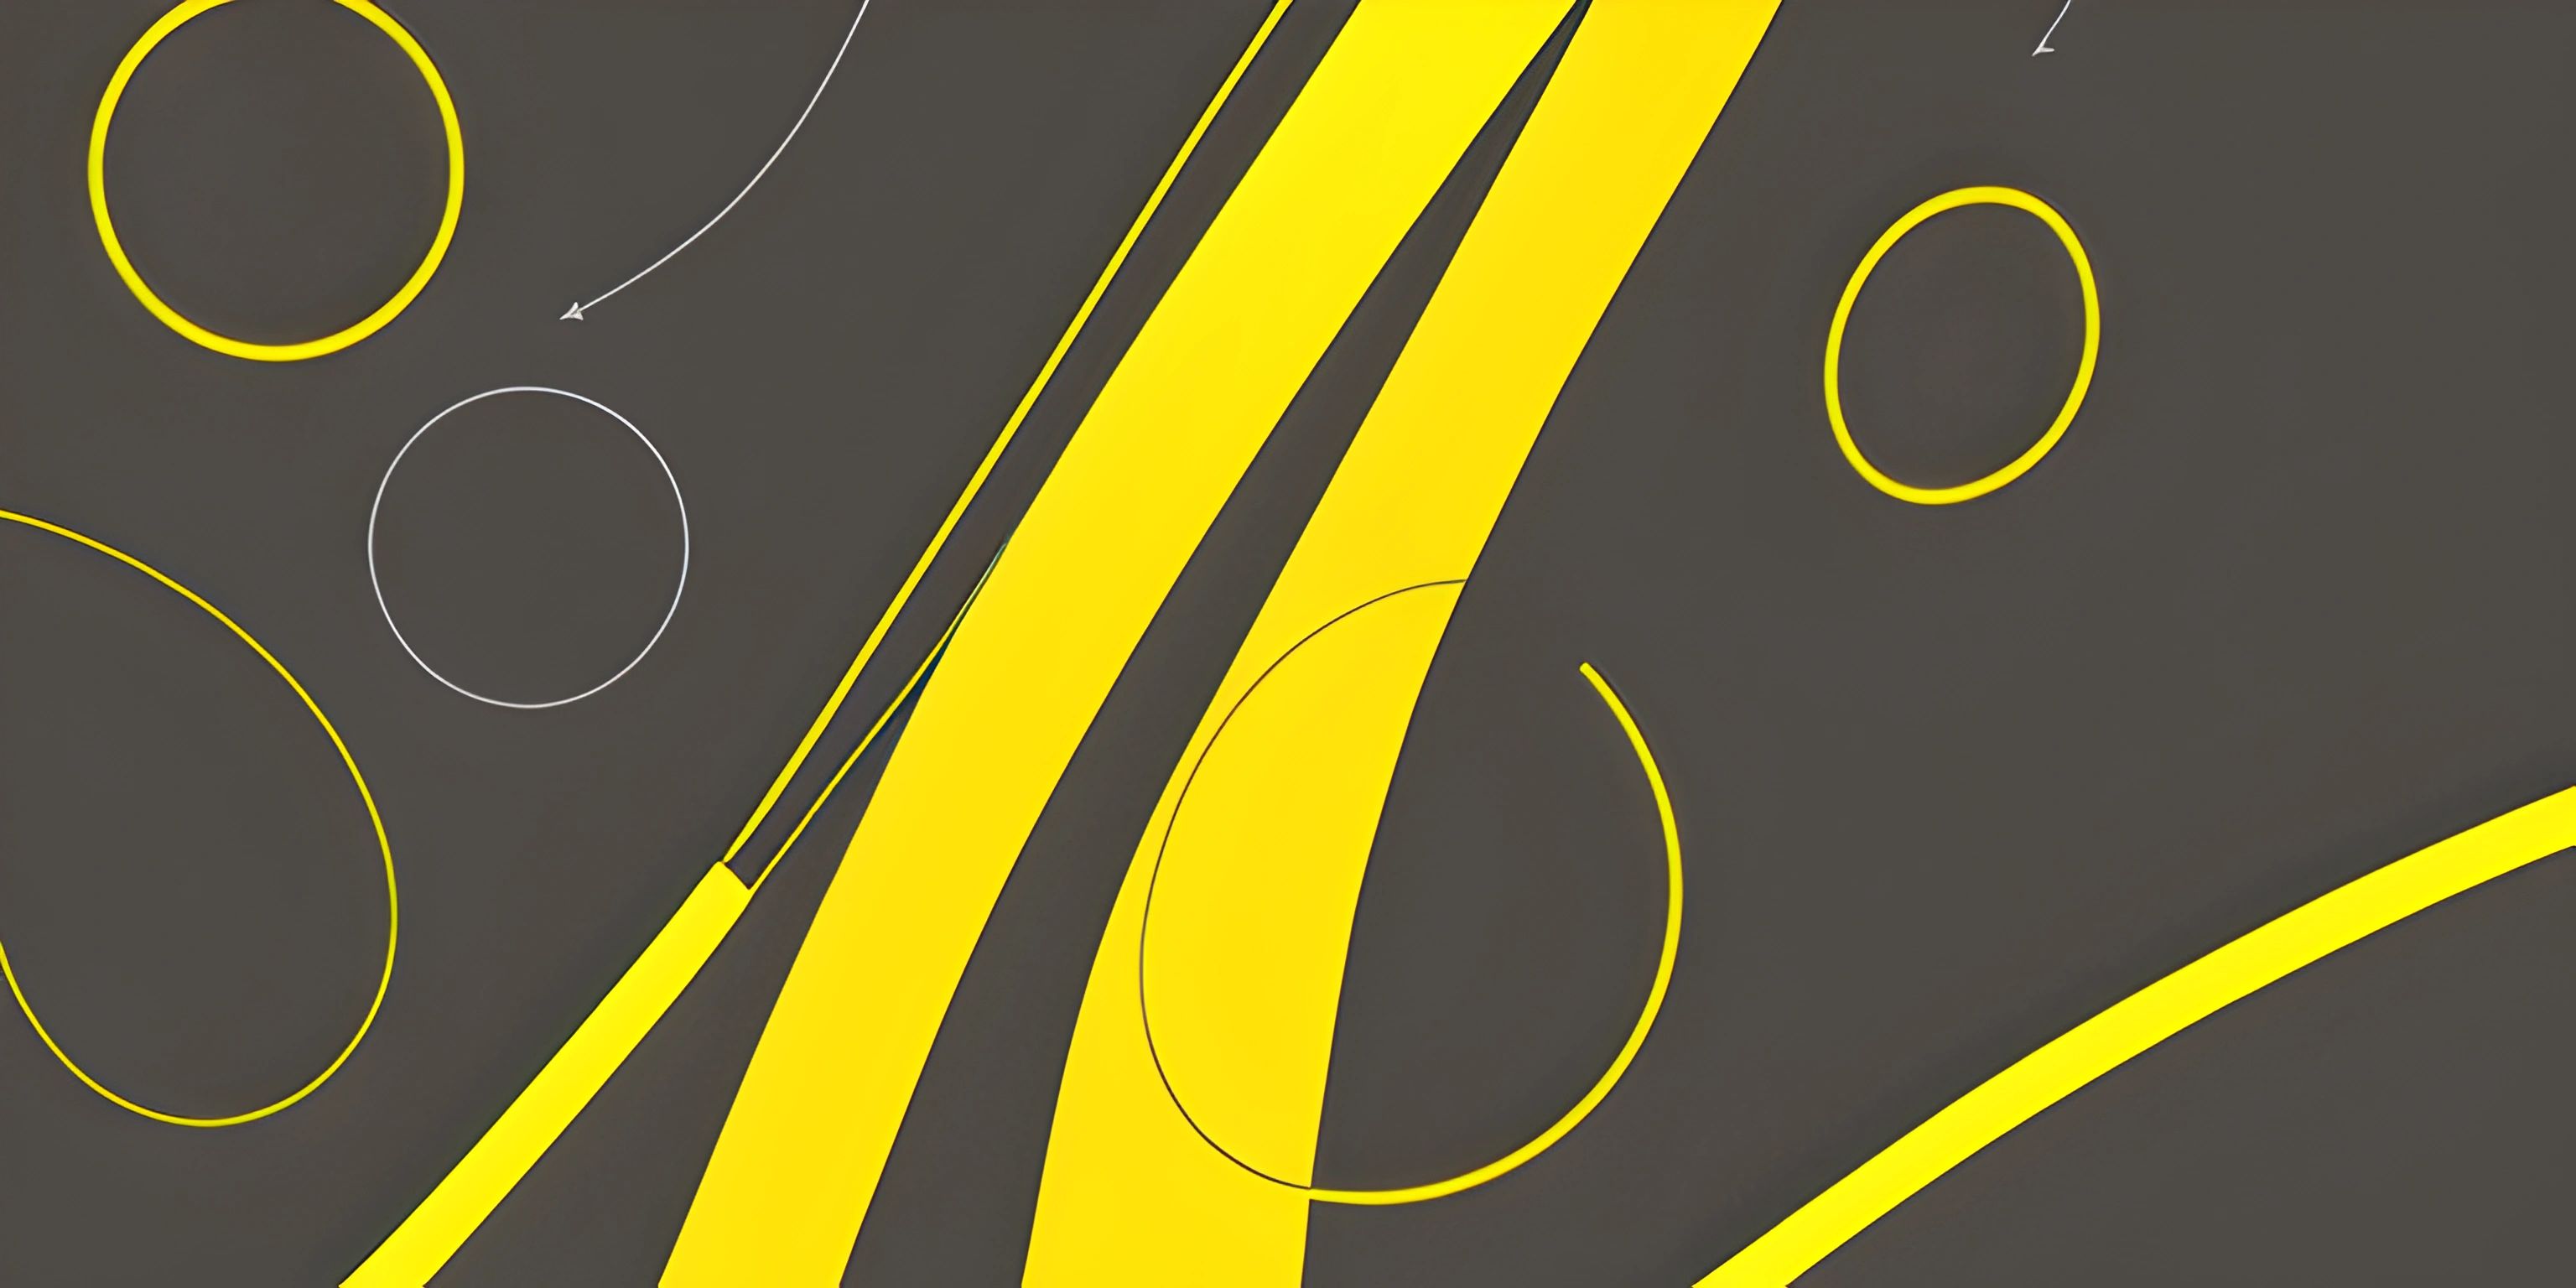 black and yellow abstract artwork featuring lines, circles, rings and swirls, against a black background